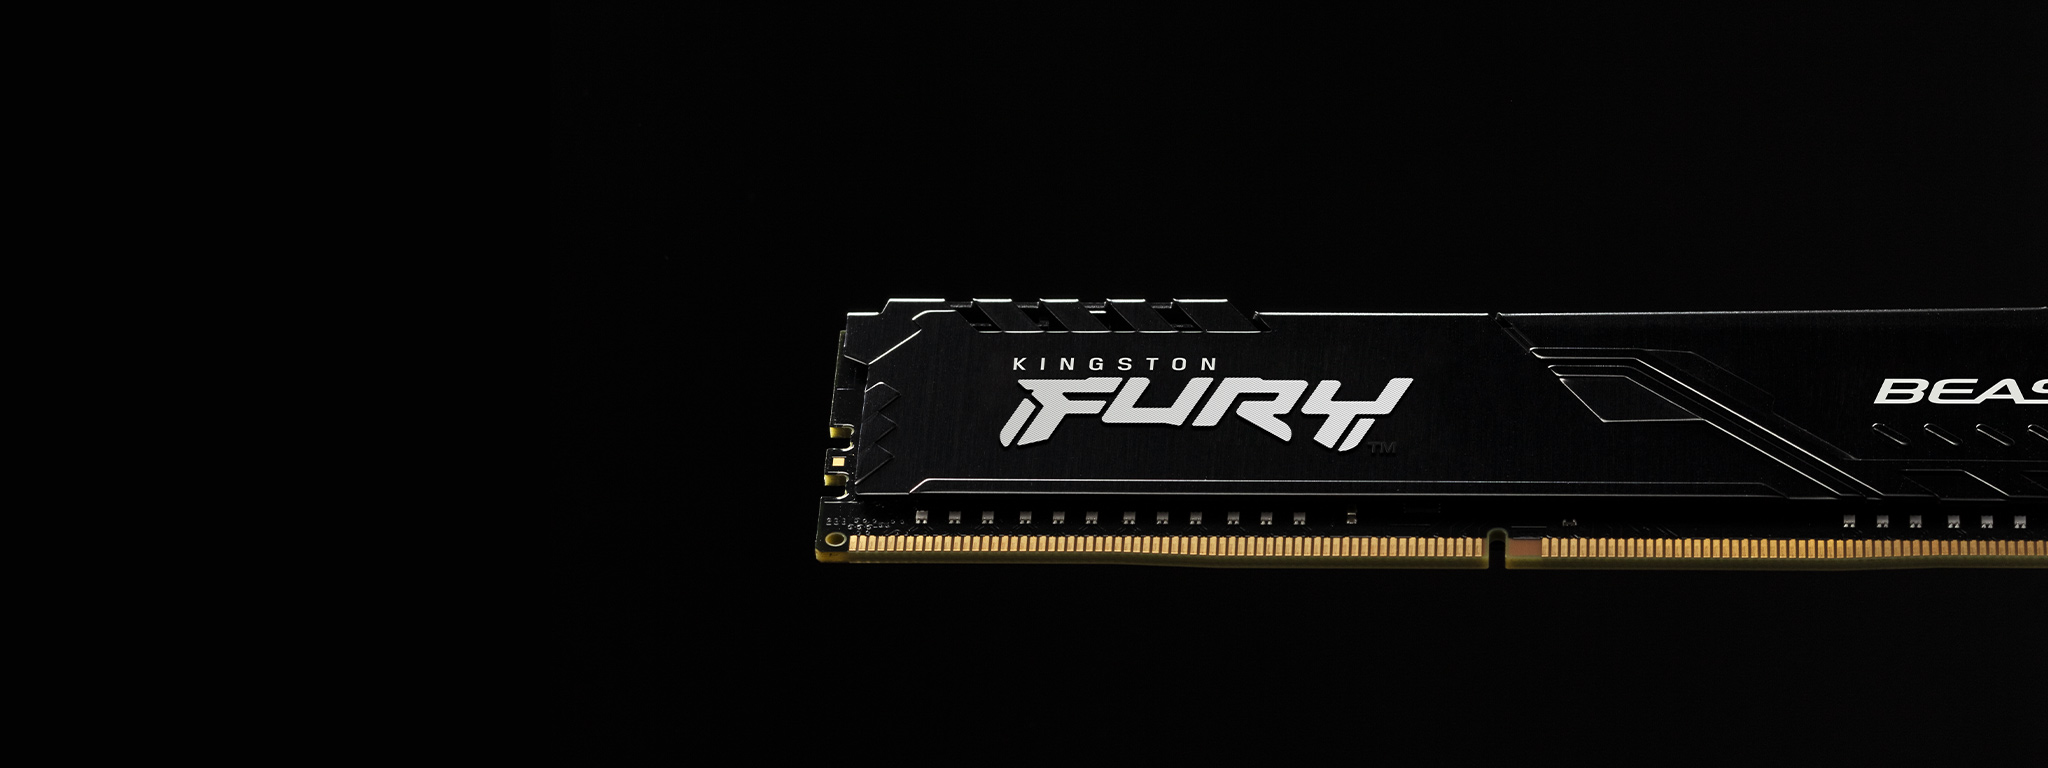 A Kingston FURY Beast DDR4 memory module sits against a black background